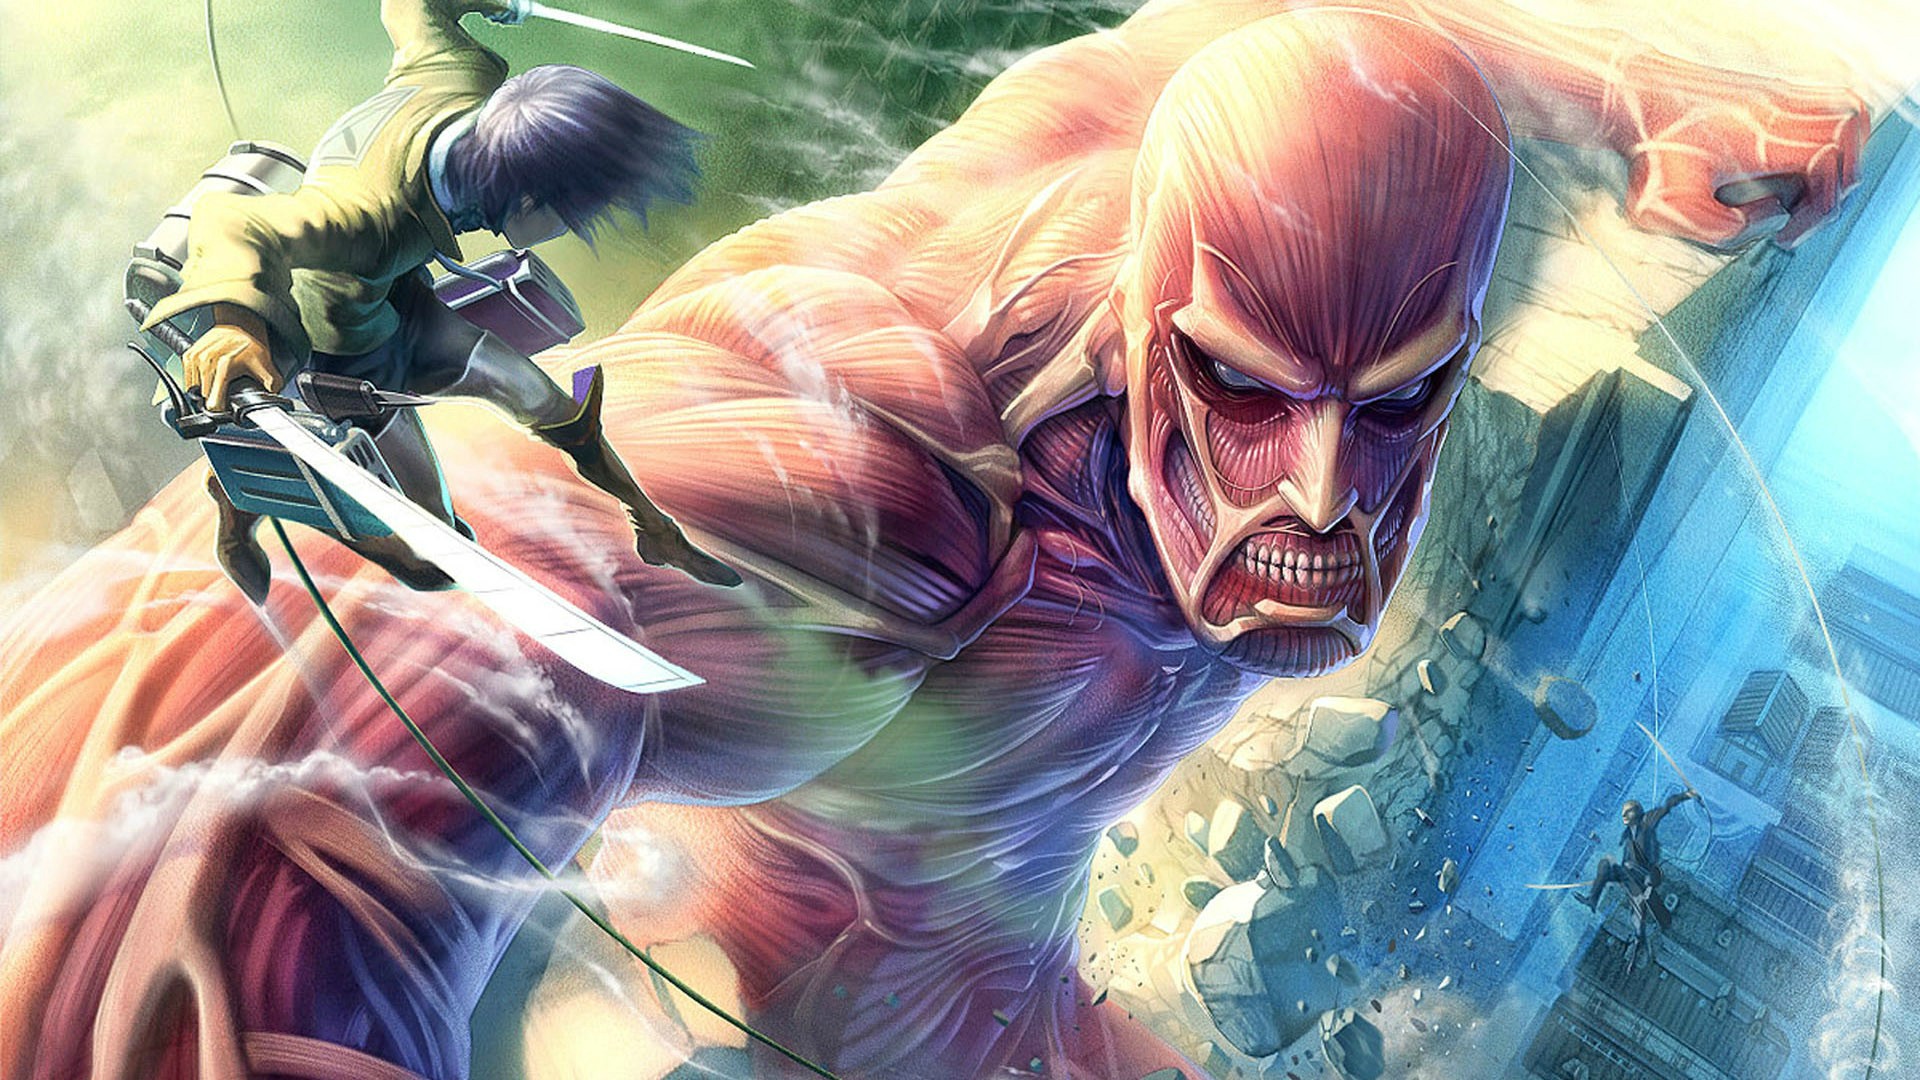 448 Attack On Titan HD Wallpapers Backgrounds - Wallpaper Abyss